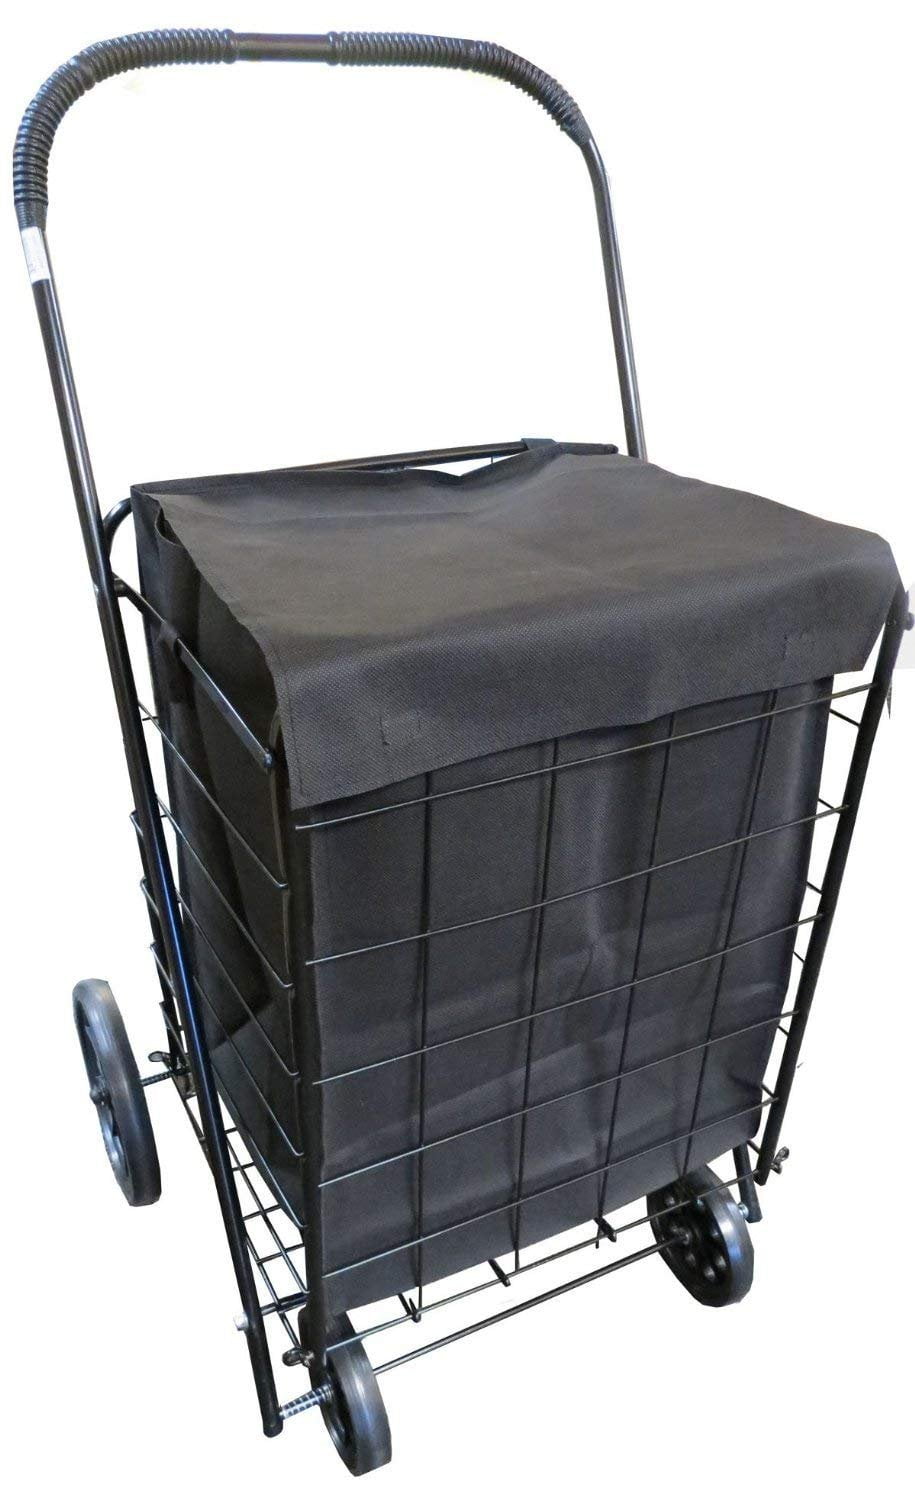 Extra Large Heavy Duty Shopping Carts Grocery Laundry Over sized Foldable Cart 